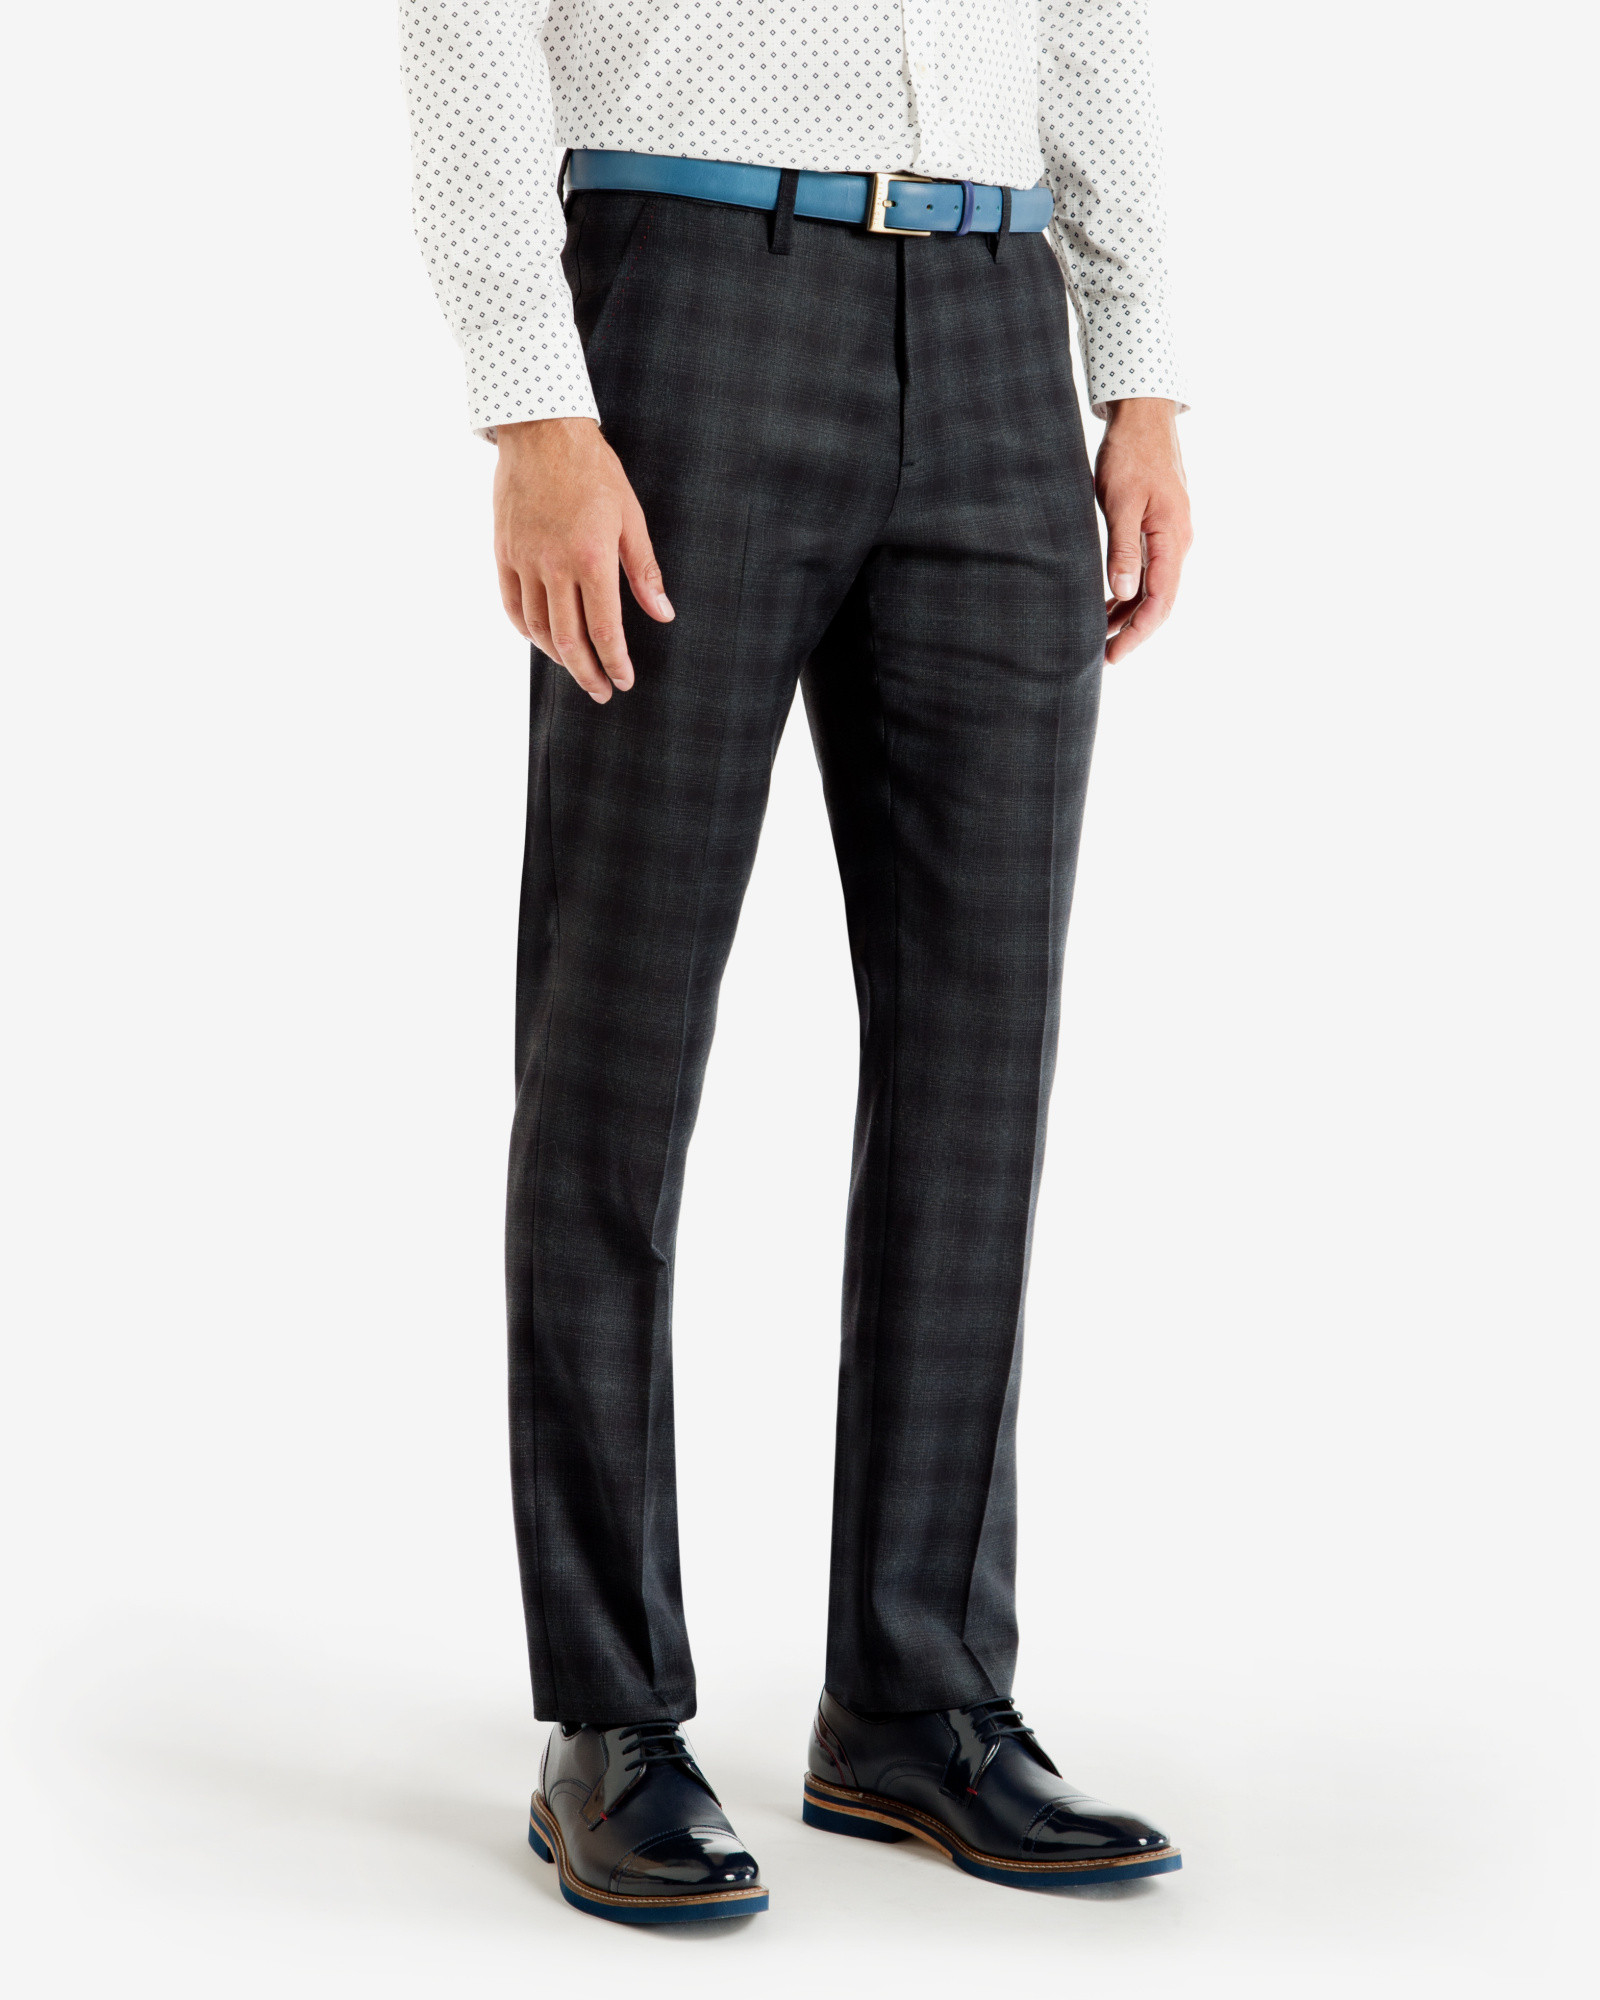 Ted Baker Checked Wool Trousers in Dark Blue (Blue) for Men - Lyst